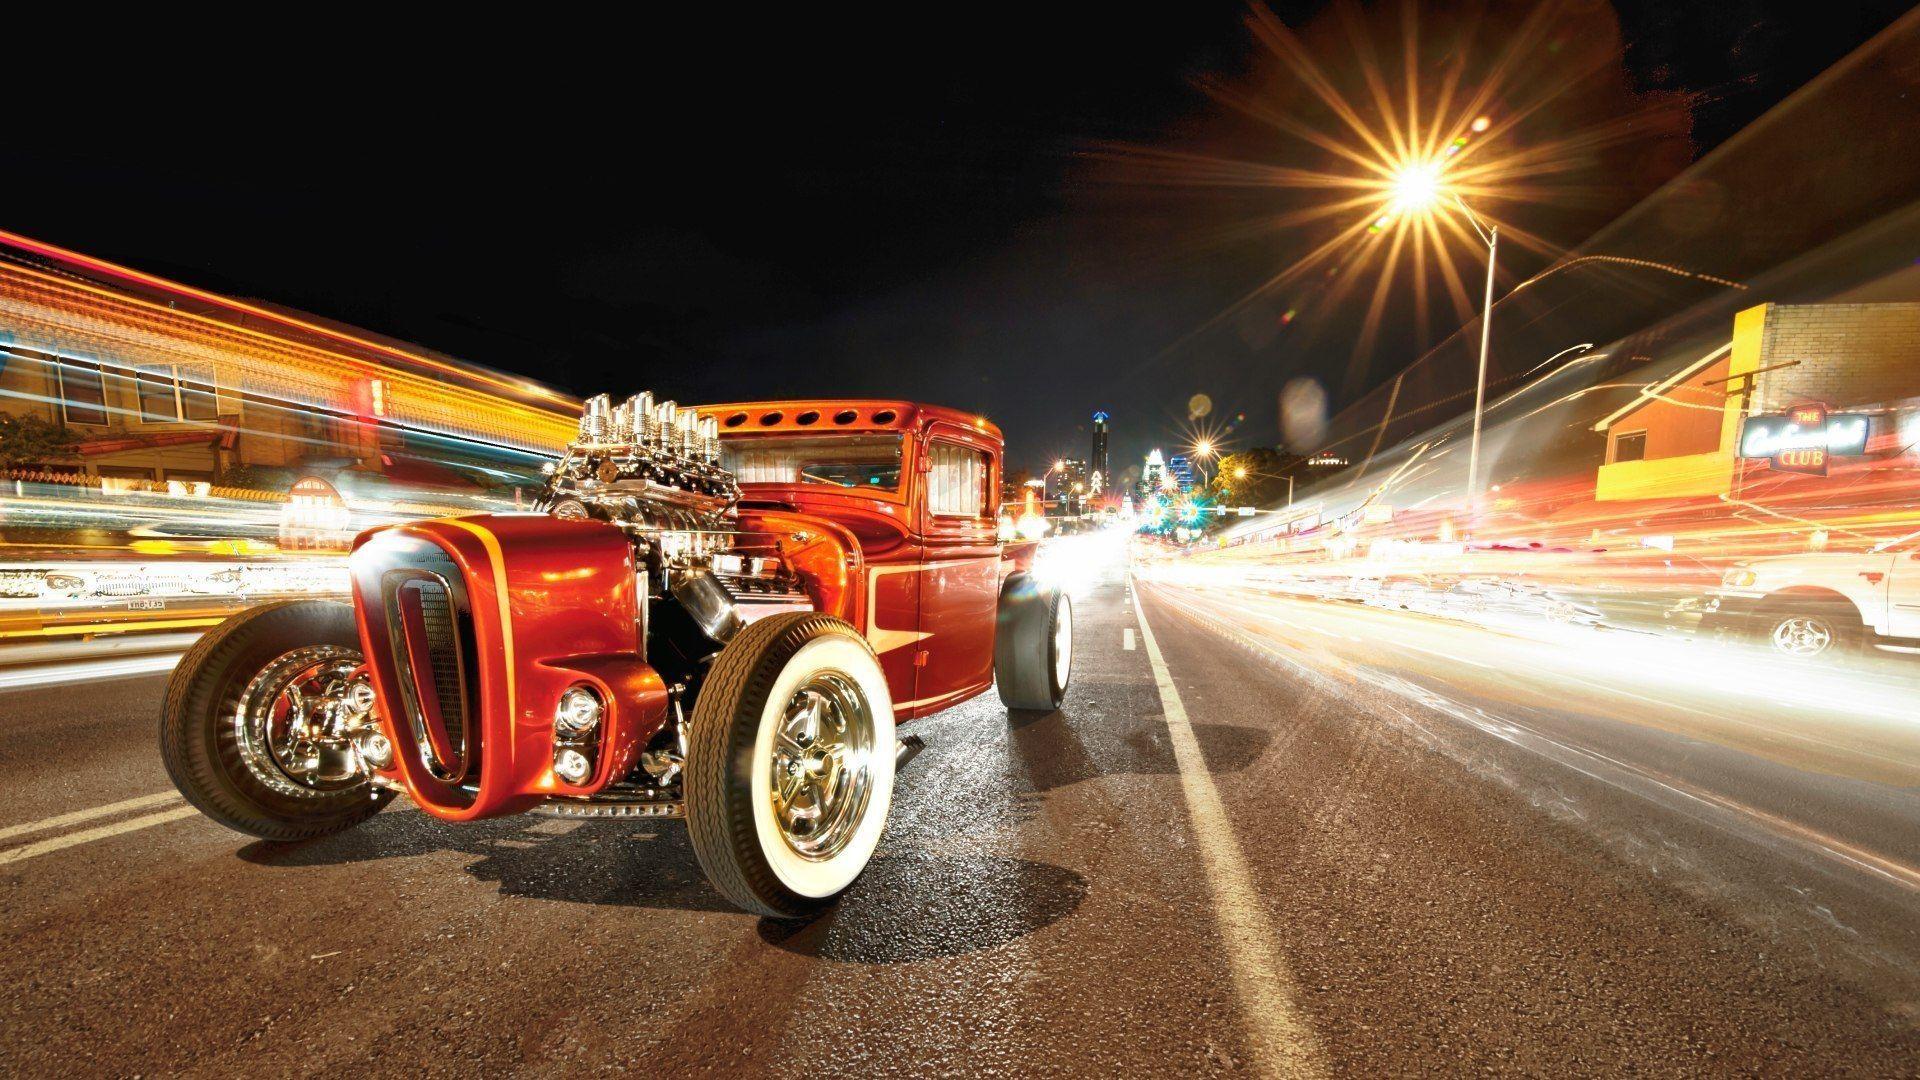 Best HQ Definition Wallpaper&;s Collection: Hot Rod Wallpaper 33